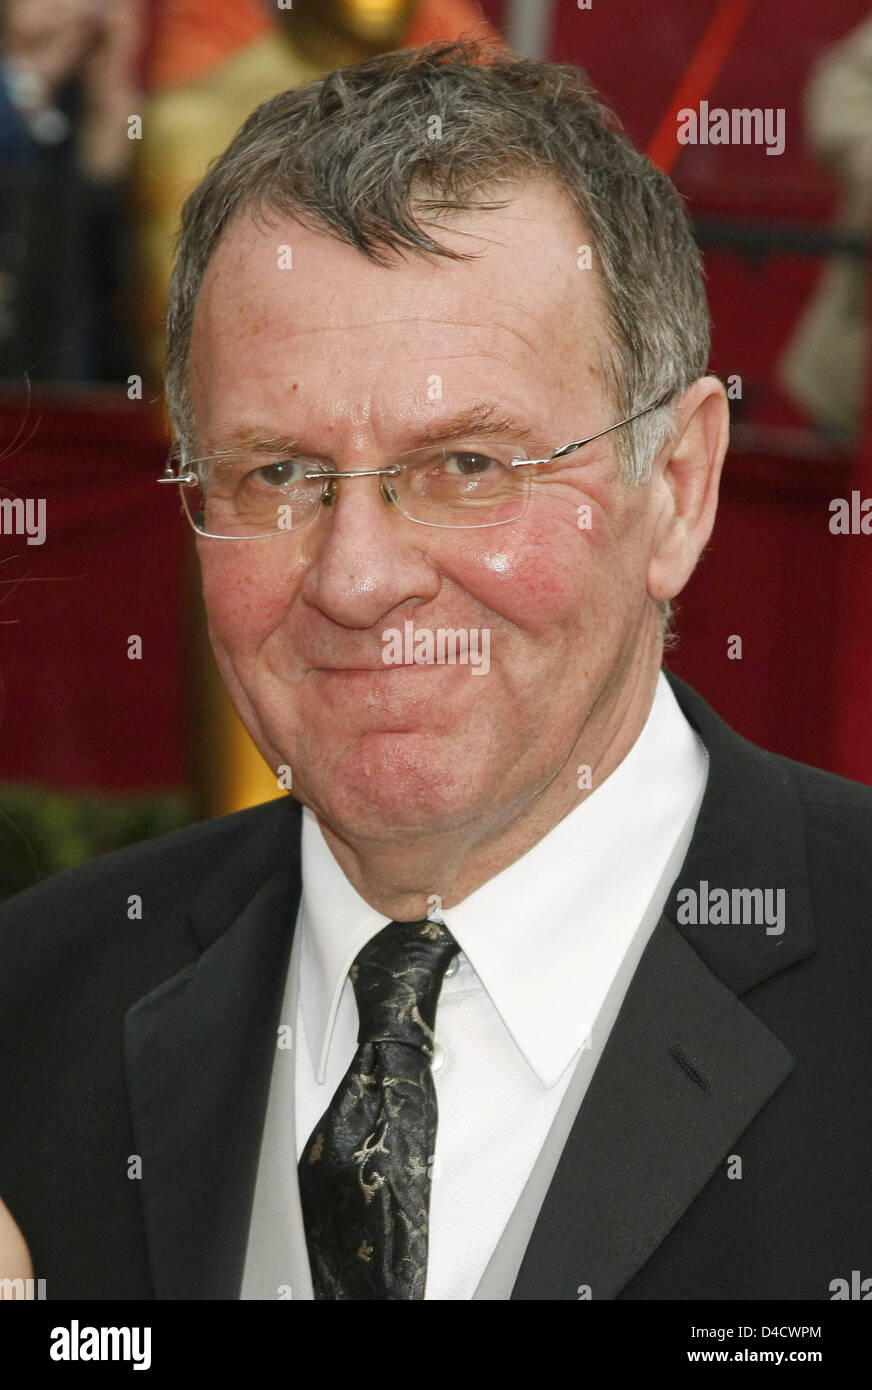 Actor Tom Wilkinson arrives on the red carpet of the 80th Academy Awards in front of the Kodak Theatre in Hollywood, Los Angeles, USA, 24 February 2008. Photo: Hubert Boesl Stock Photo